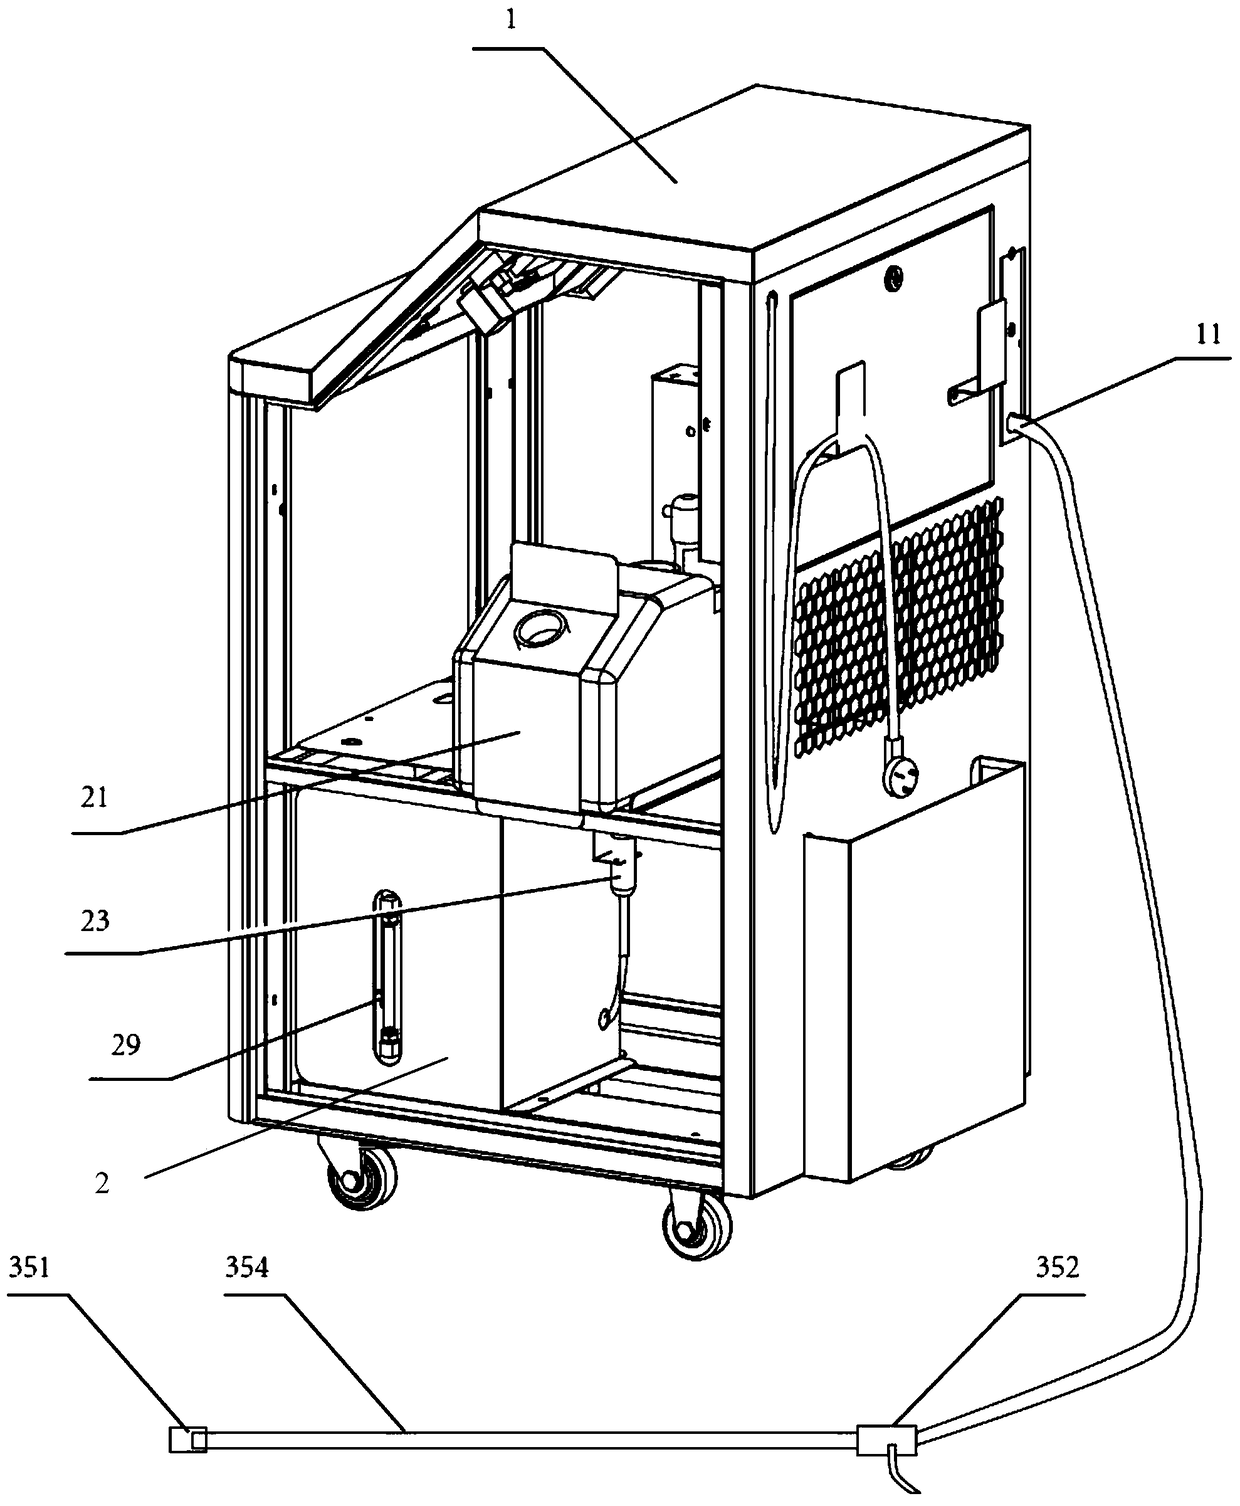 A three-way catalytic cleaning machine